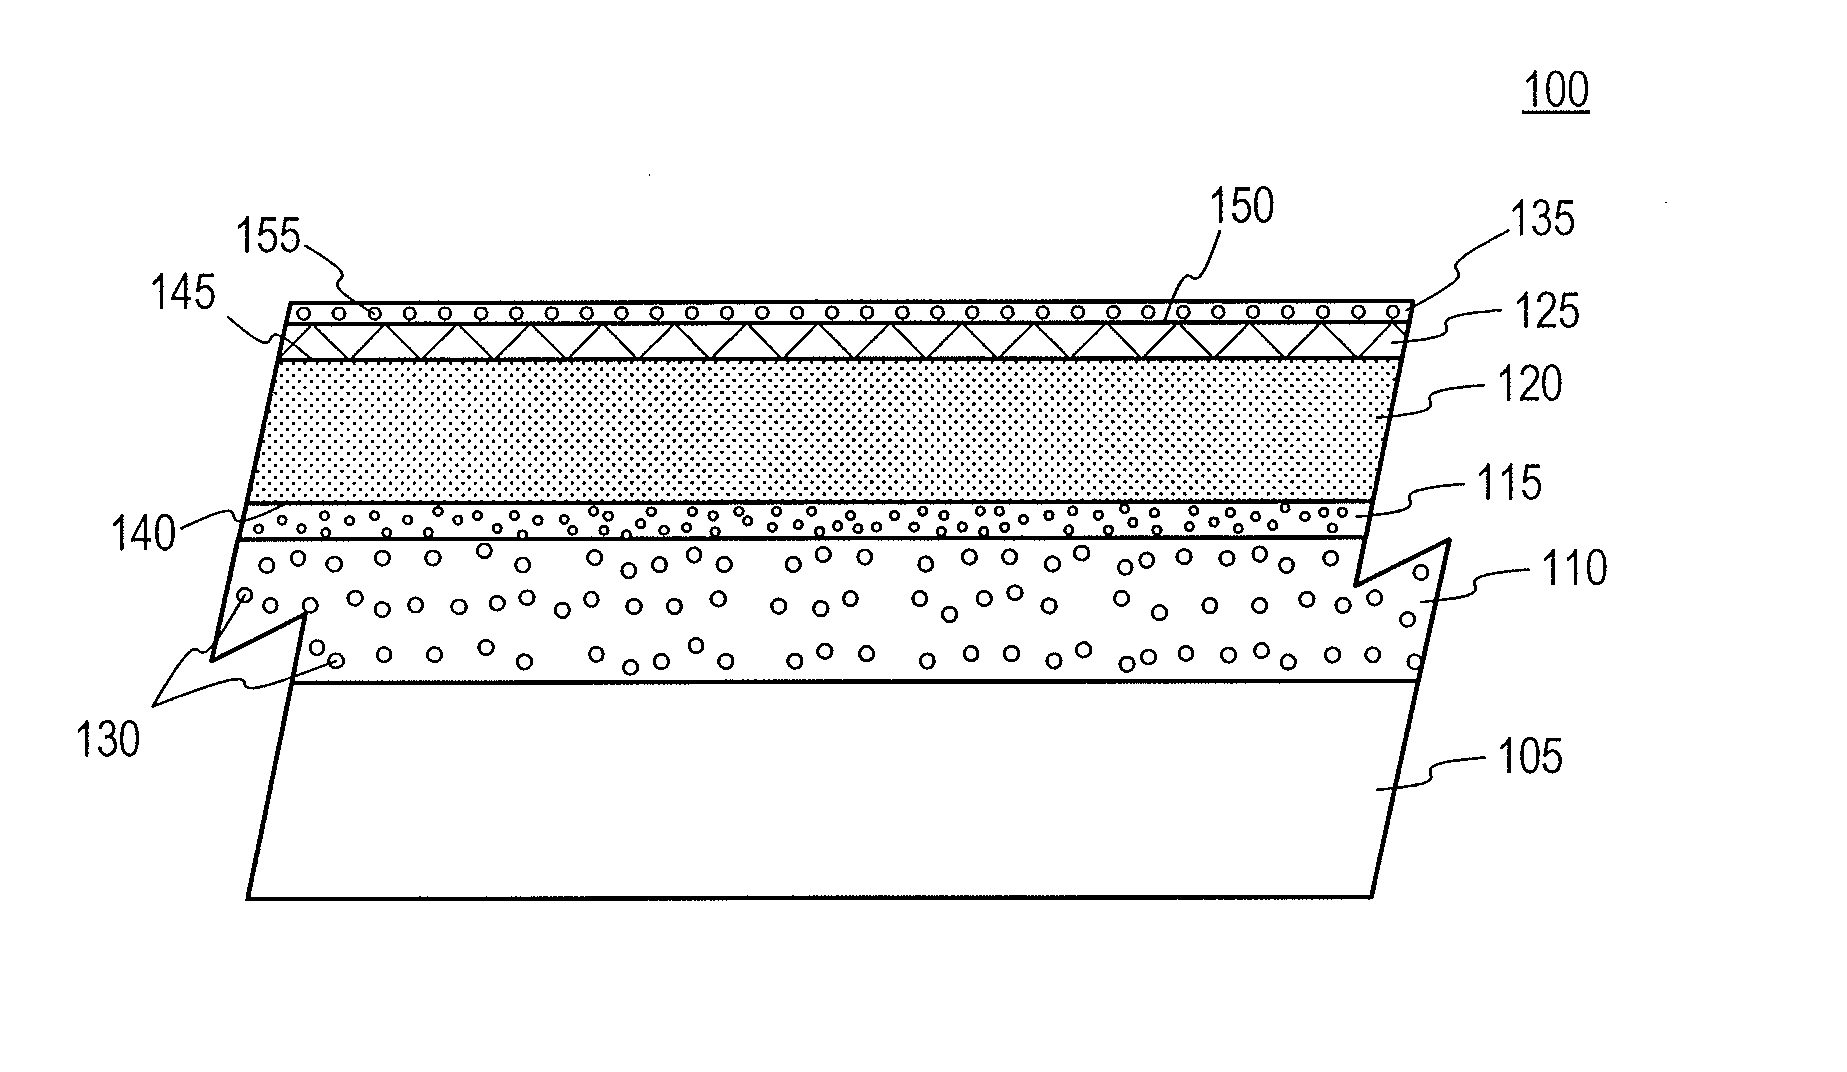 Metal-air battery and methods for forming improved metal-air batteries